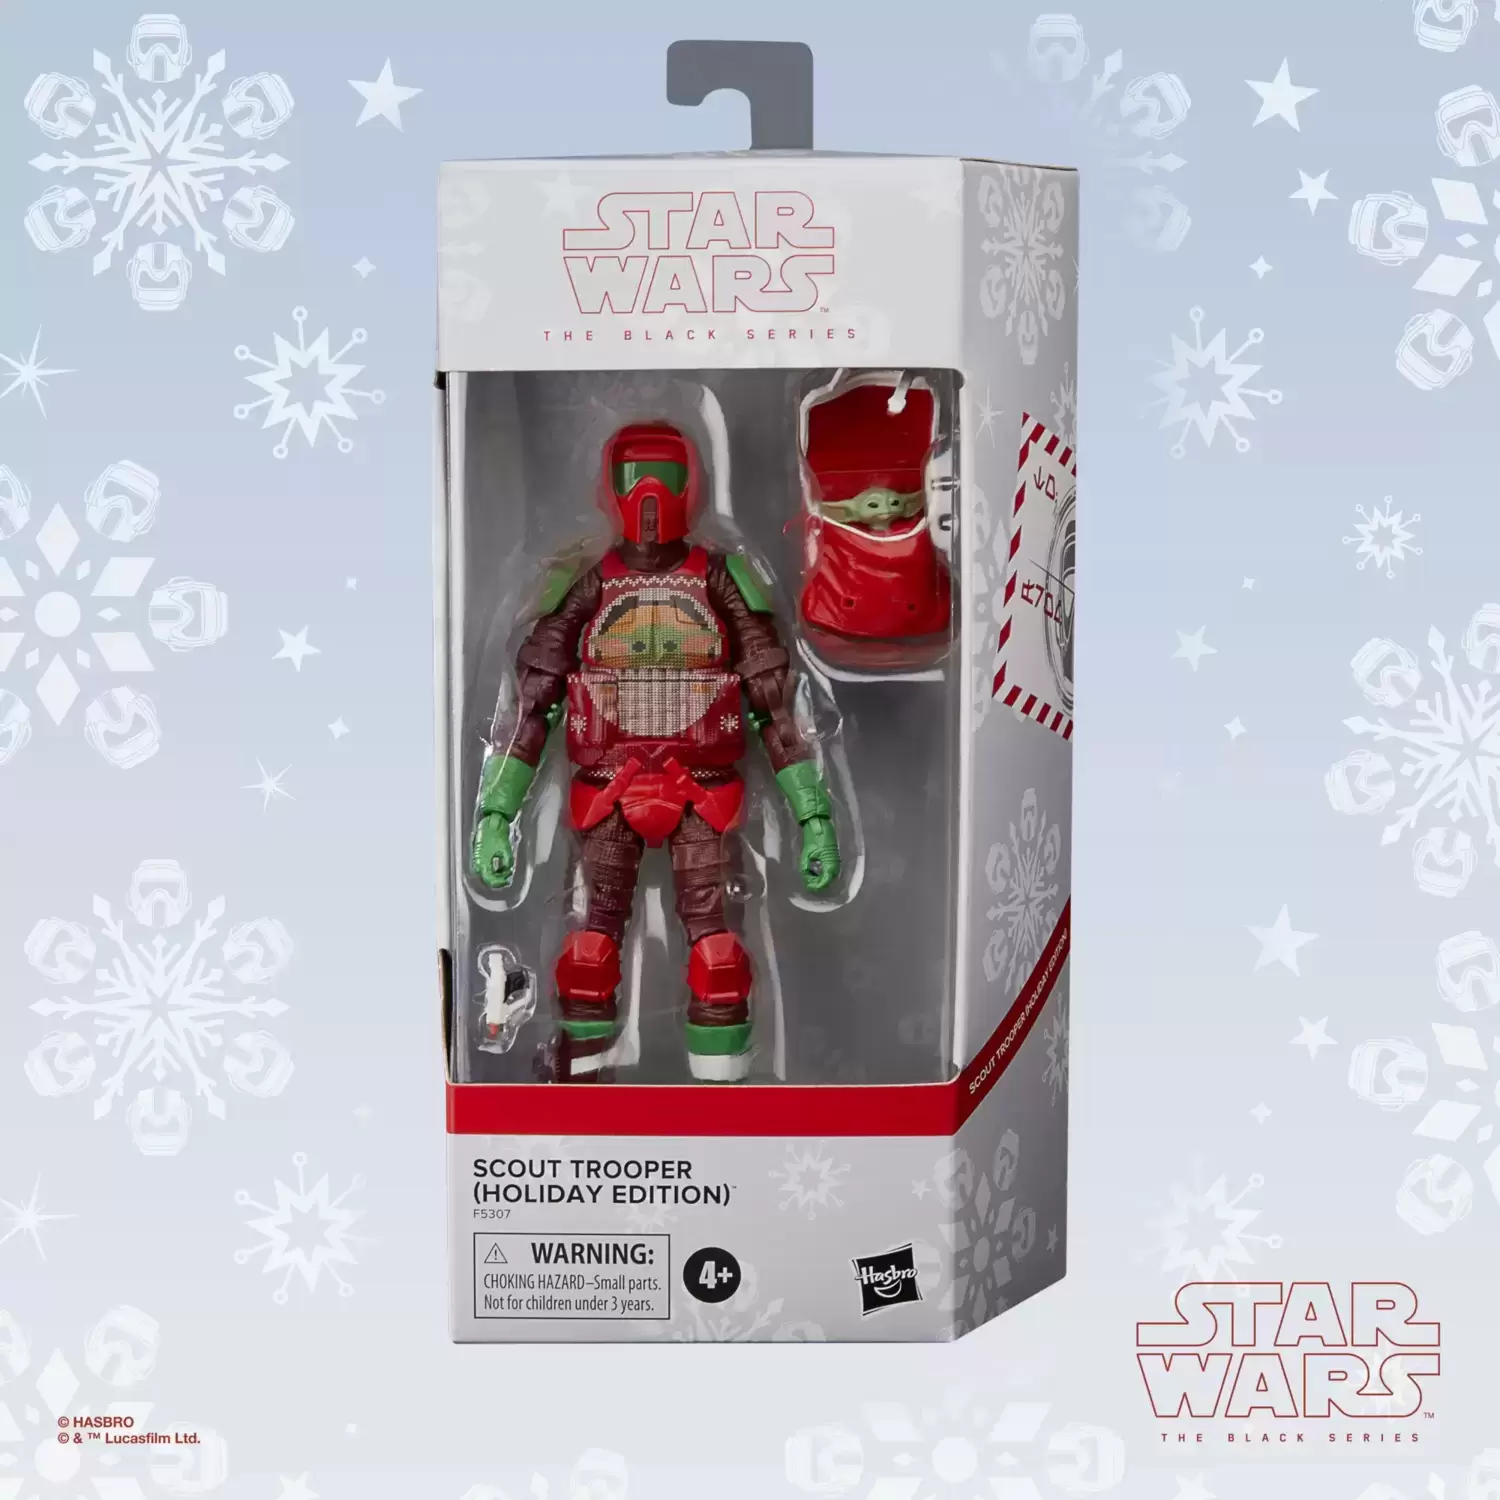 The Black Series - Holiday Edition - Scout Trooper (Holiday Edition)